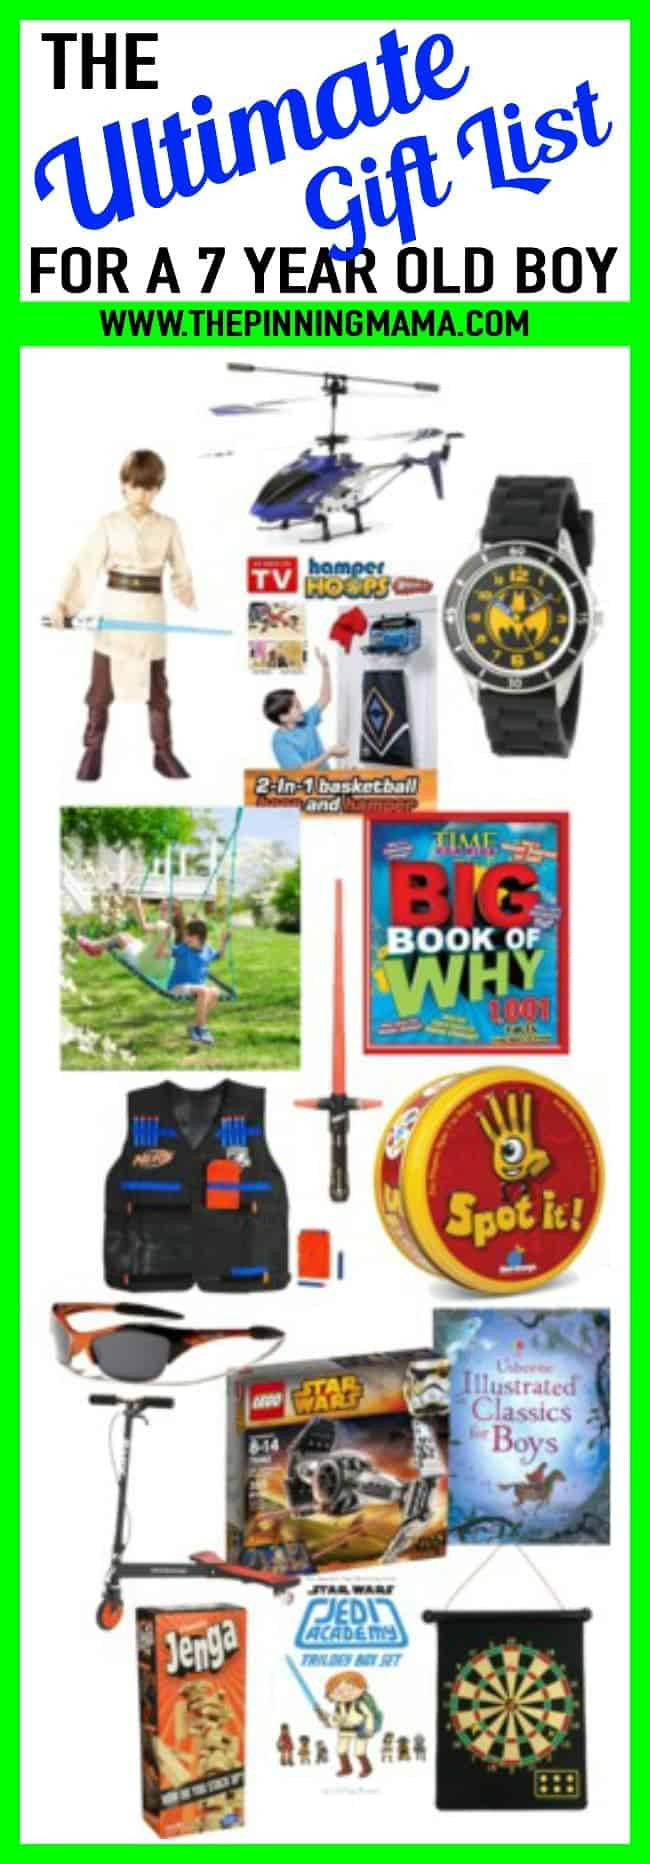 7 Year Old Boy Birthday Gift Ideas
 BEST Gift Ideas for a 7 Year Old Boy • The Pinning Mama